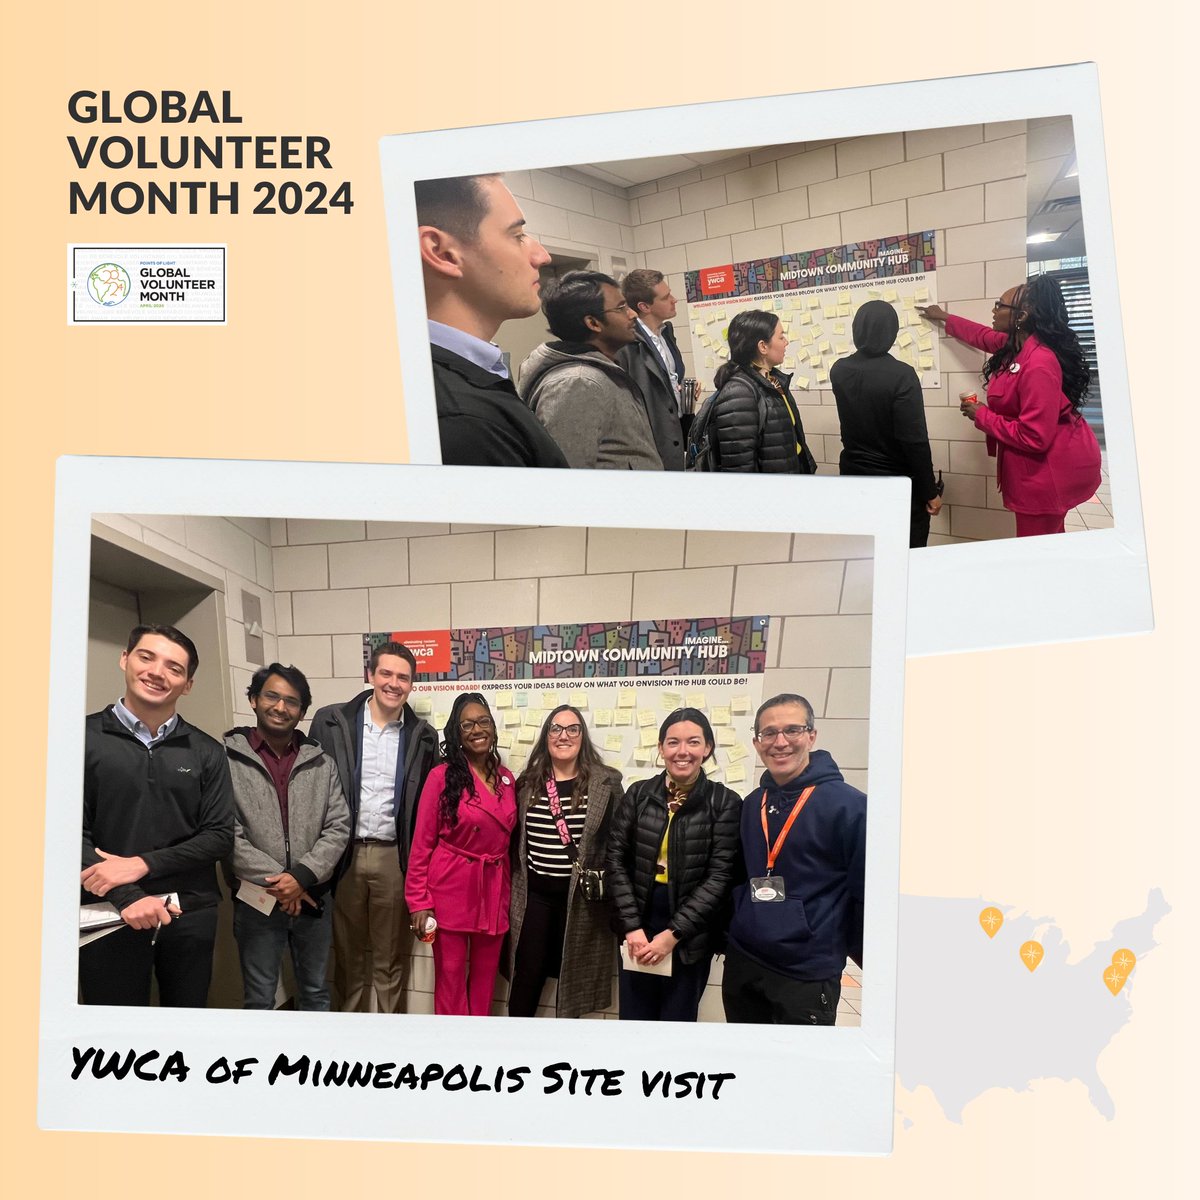 #VolunteerSnapshots For the next few months, our volunteer consultants will help YWCA Minneapolis expand their programming. Follow along as we celebrate and showcase our volunteers for #GlobalVolunteerMonth